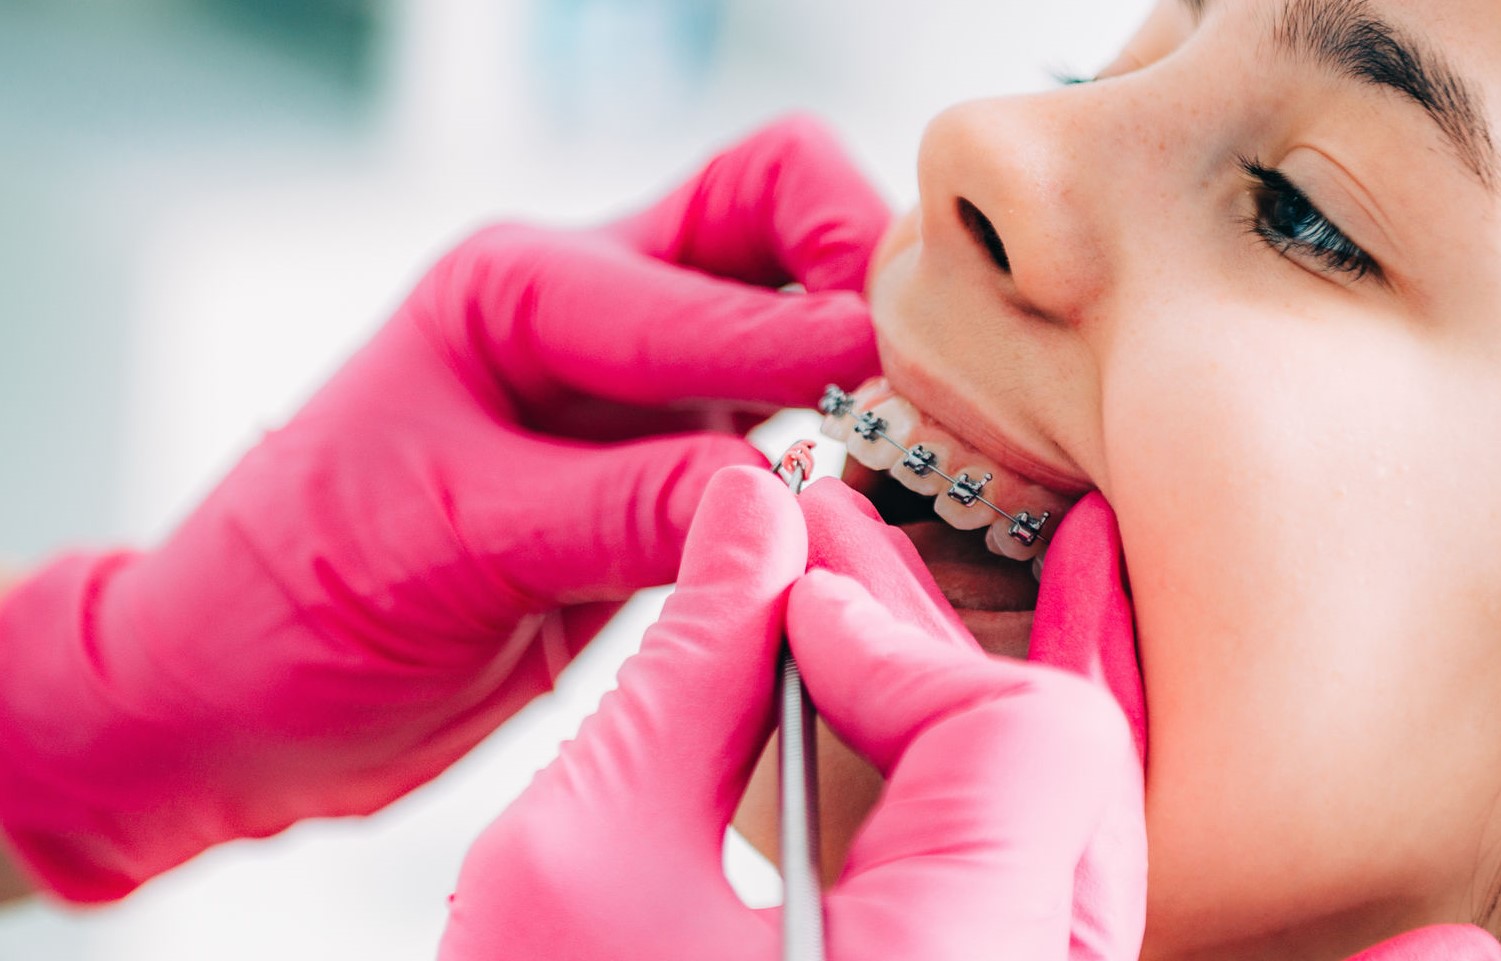 Article image for Dental work doesn’t buy happiness, study finds